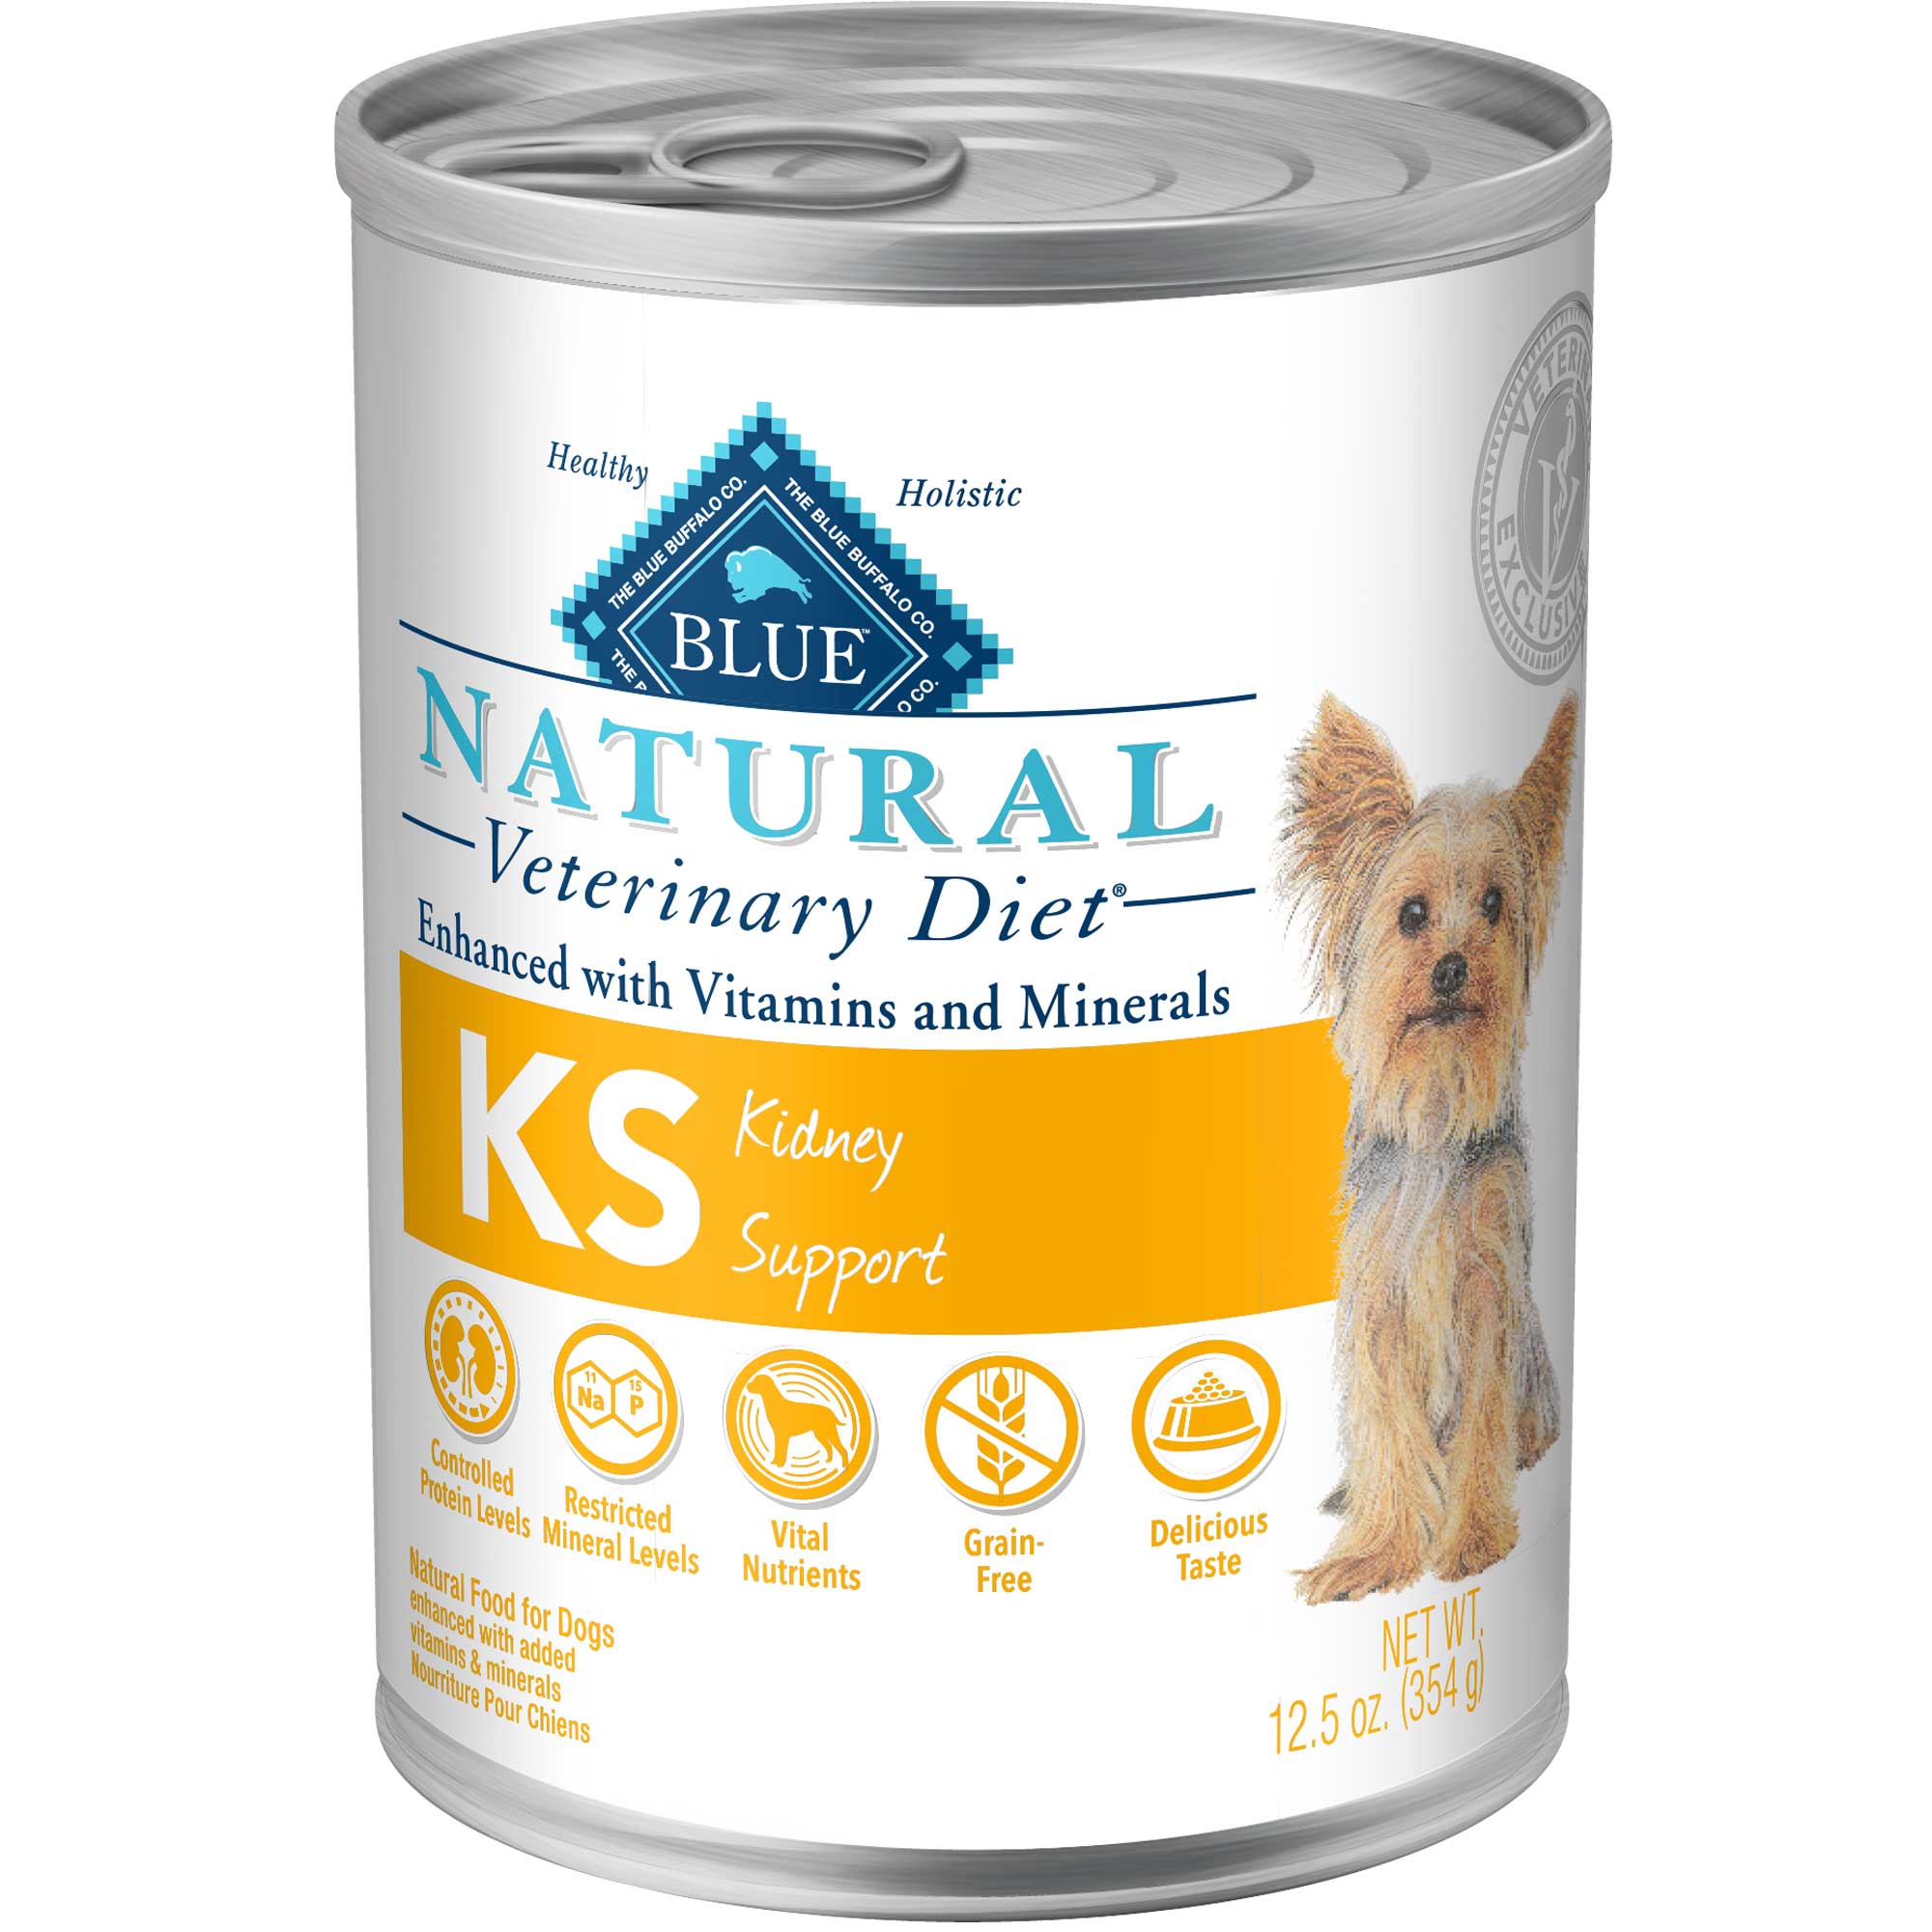 BLUE Natural Veterinary Diet KS Kidney Support Canned Dog Food Usage